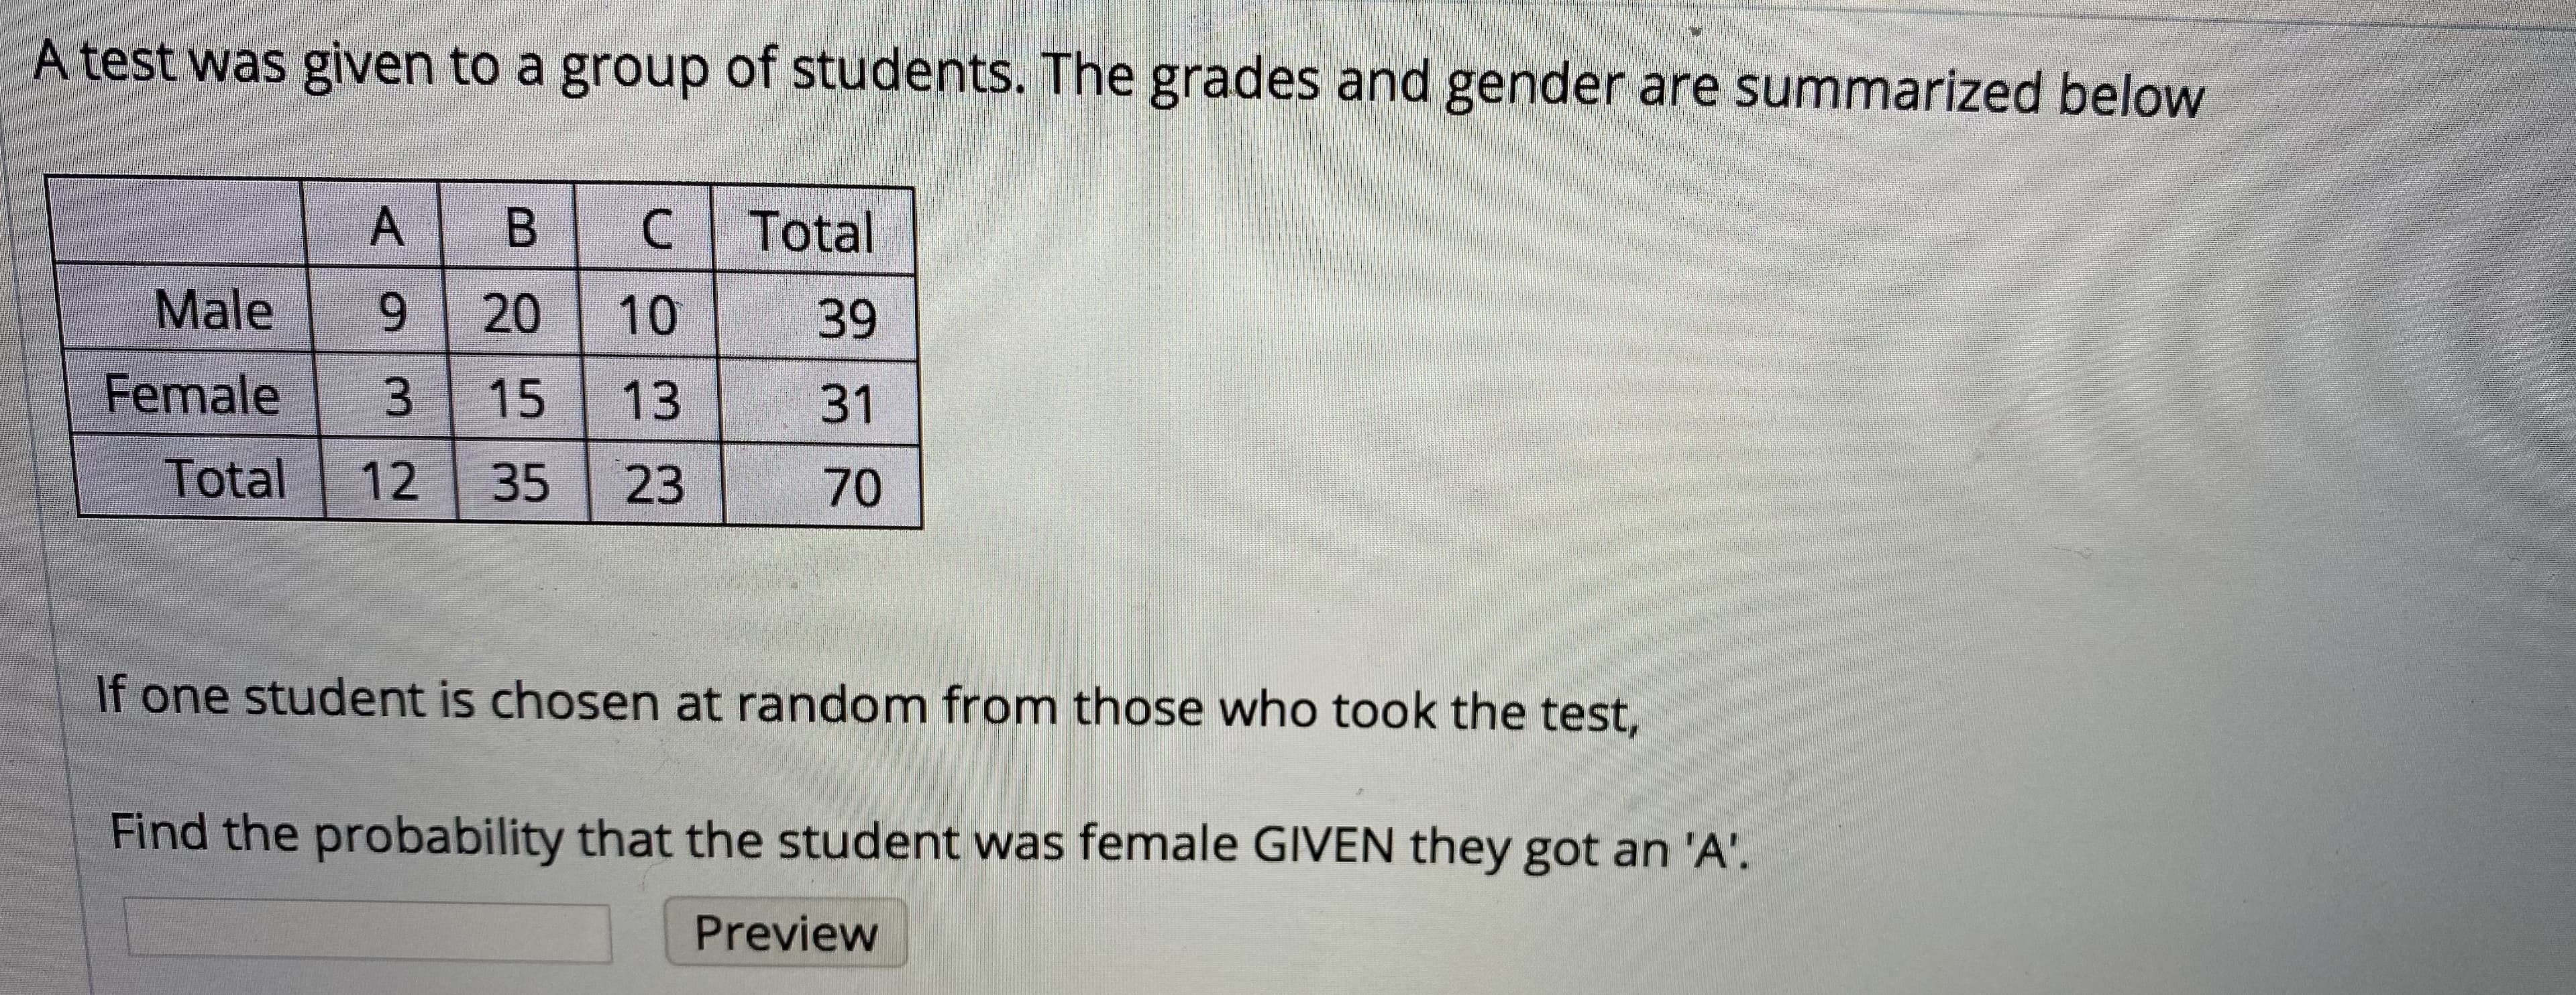 A test was given to a group of students. The grades and gender are summarized below
CTotal
Male
6.
39
Female
3.
15
13
31
Total
35
23
70
If one student is chosen at random from those who took the test,
Find the probability that the student was female GIVEN they got an 'A'.
Preview
10
20
12
